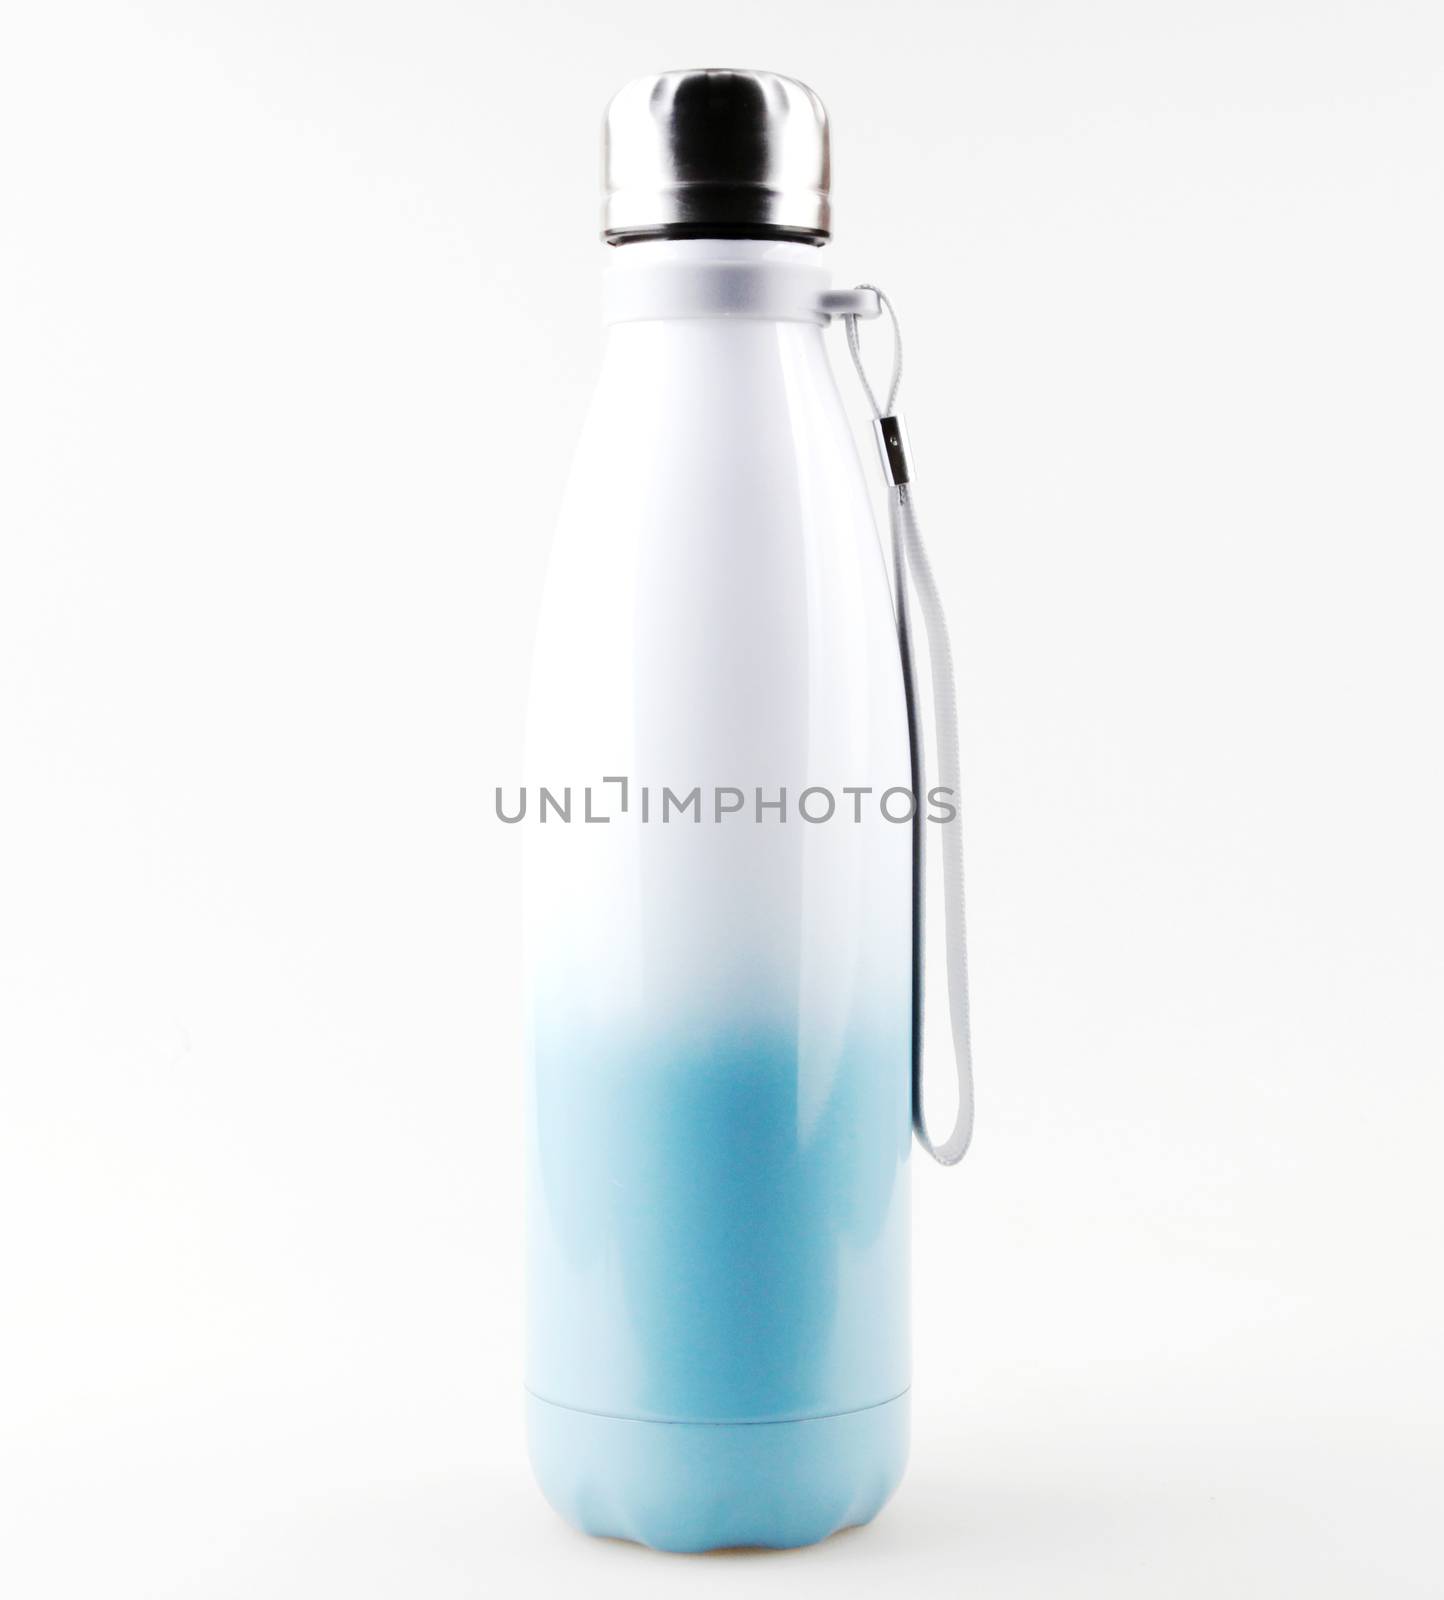 Insulated Drink Container Against White Background
 by nenovbrothers